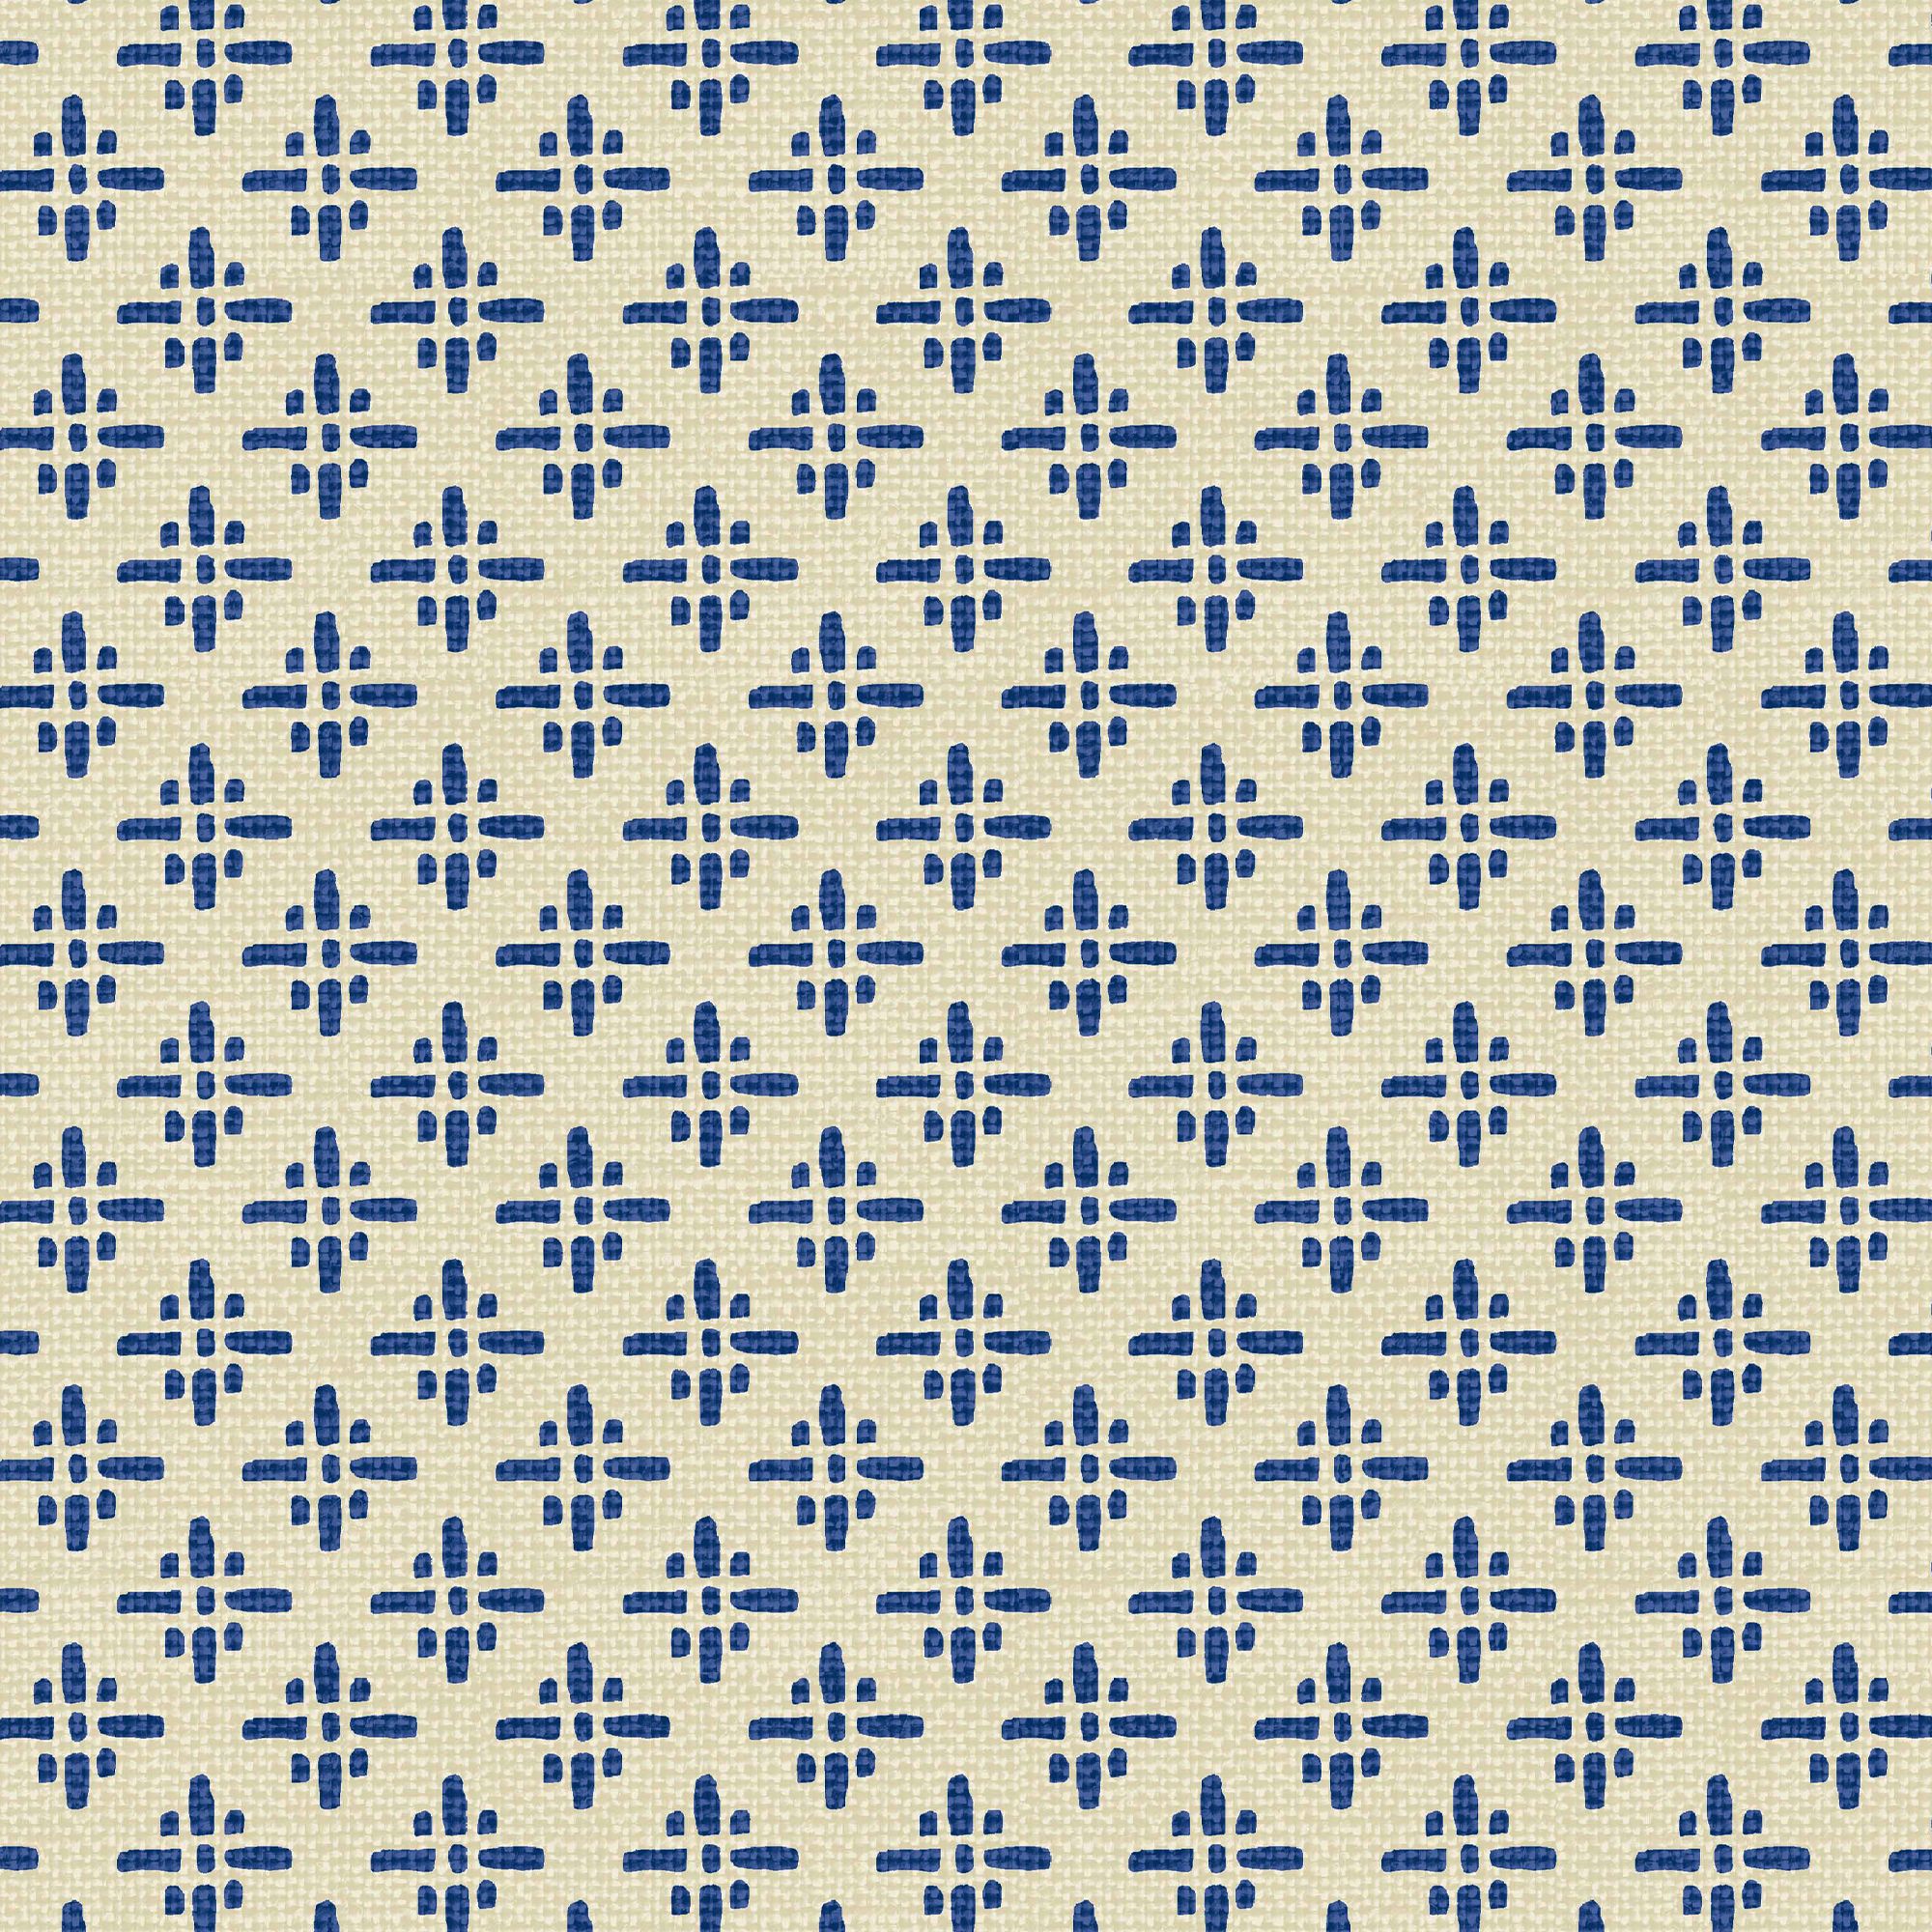 Joules Blue Geometric Smooth Wallpaper